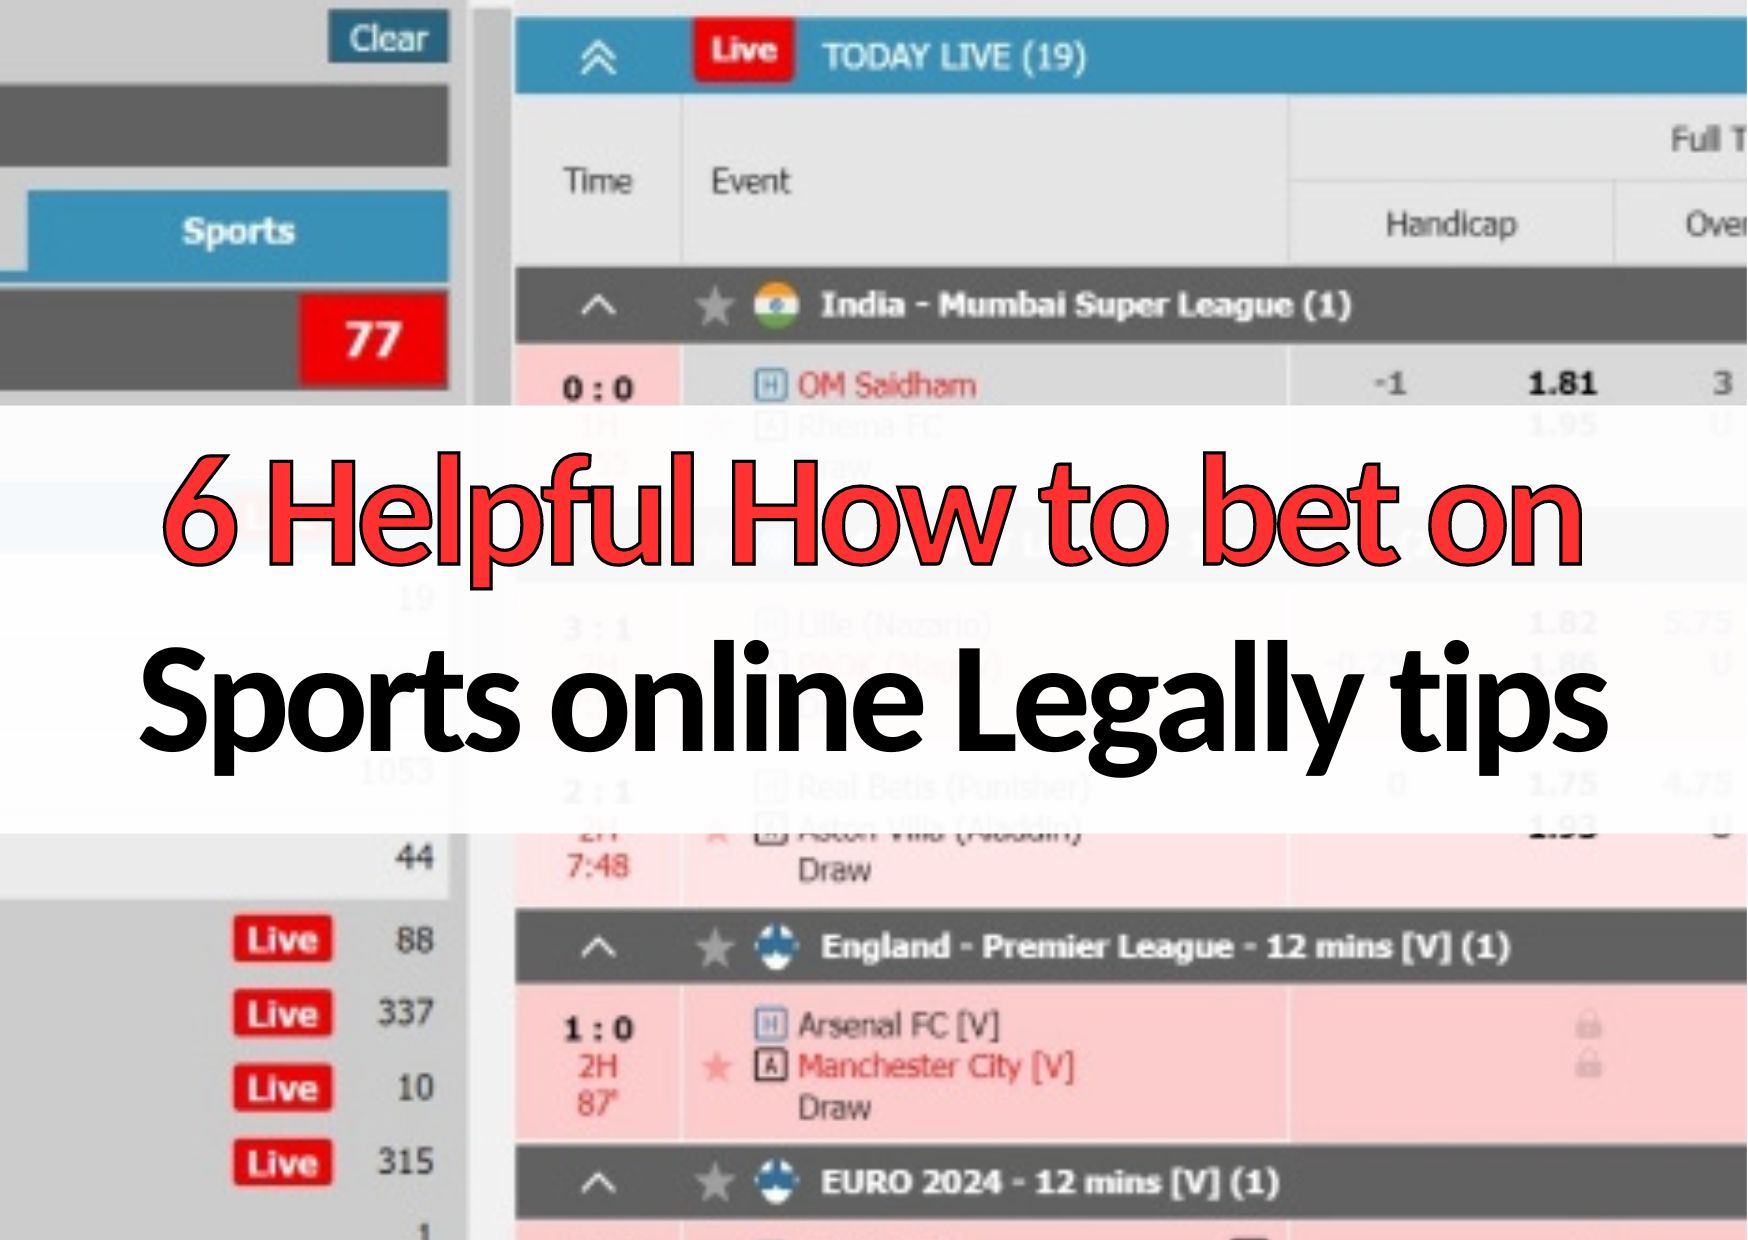 6 helpful how to bet on sports online legally tricks